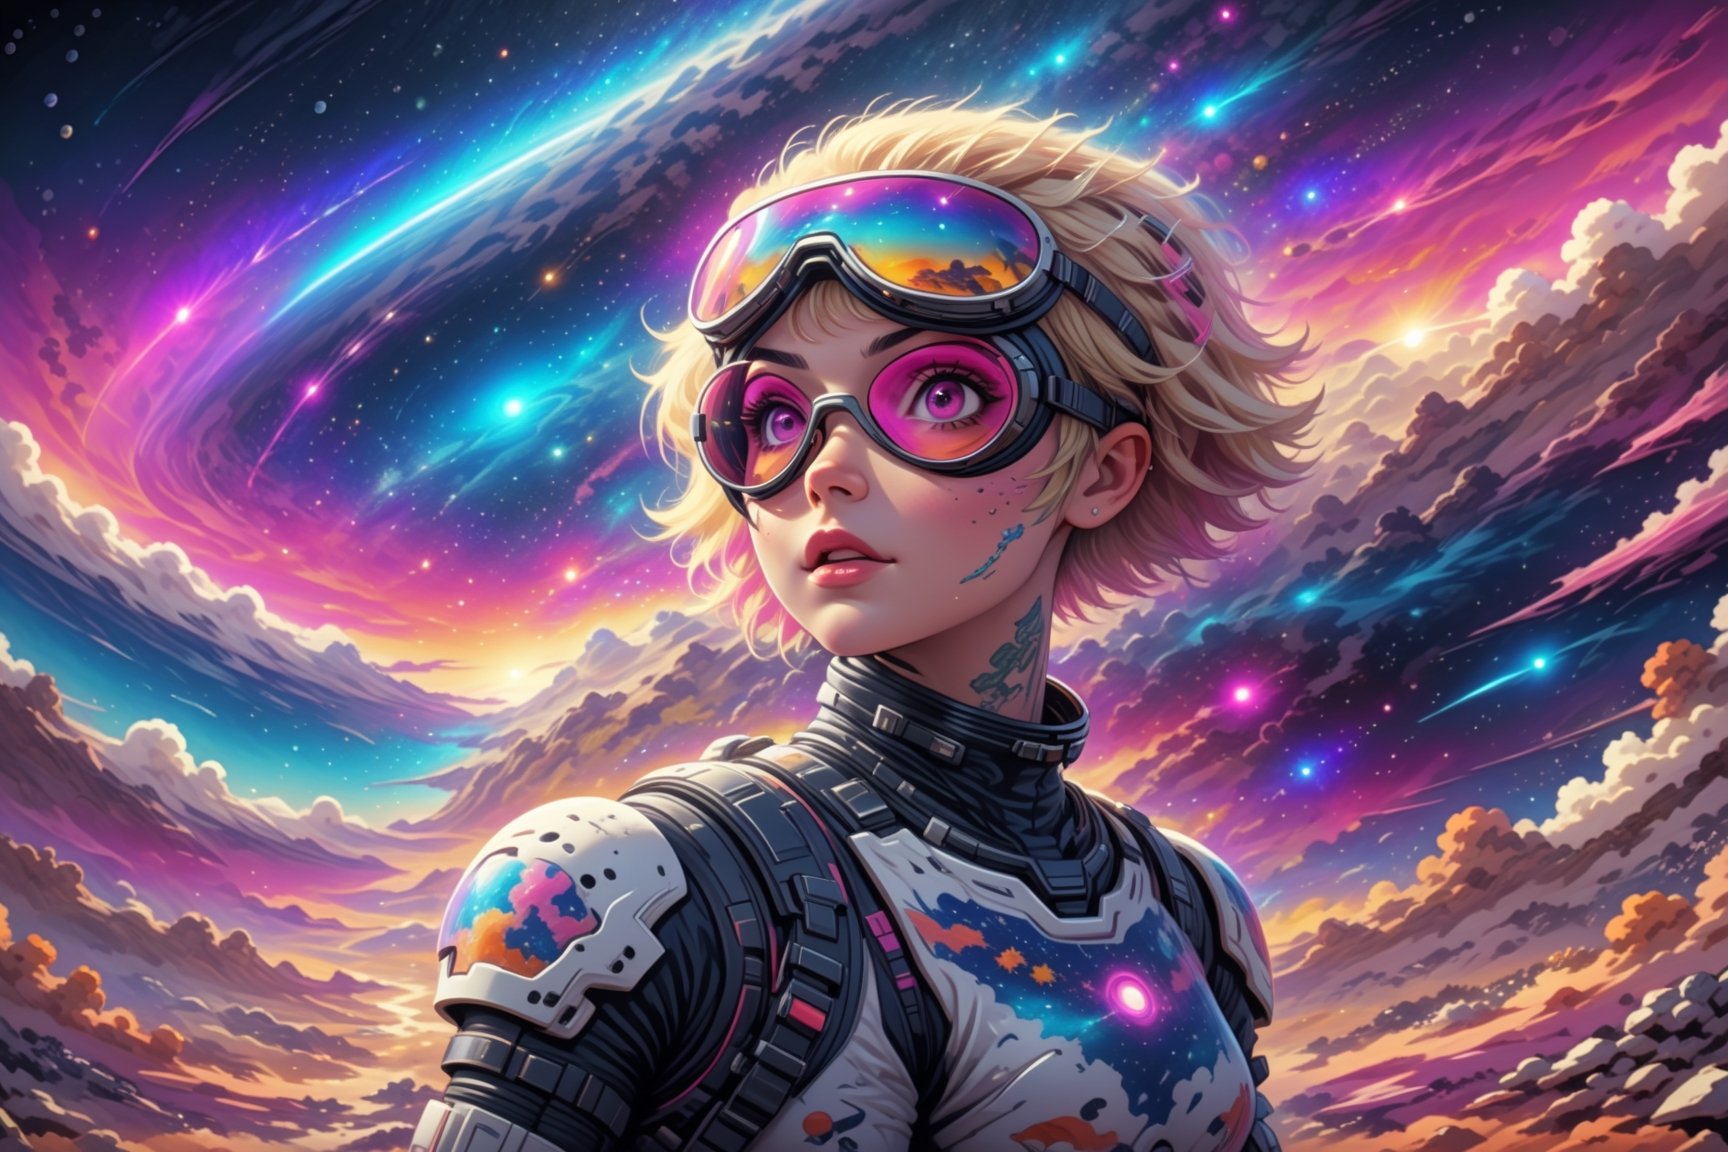 close-up comic book illustration of a woman in the mountains, wearing astronaut suit, wearing futuristic sunglasses, (((only one woman))), lightly open lips, short blonde with ((pink hightlights)) hair, tattooed  body, full color, vibrant colors, showing tits under the dress,
sexy body, detailed gorgeous face, lonely environment, planetsand galaxies in background, exquisite detail, 30-megapixel, 4k, Vector illustration, Illustration,,,,,<lora:659095807385103906:1.0>